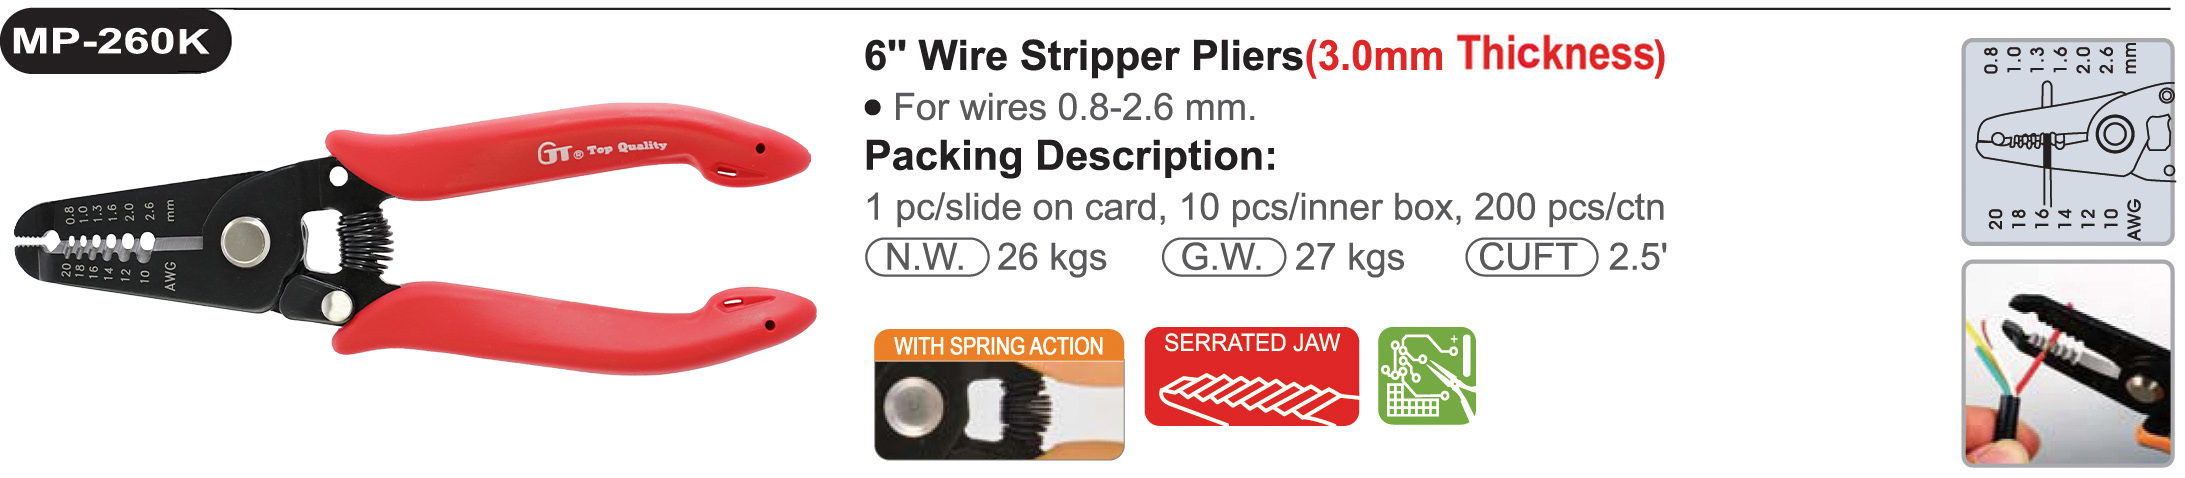 proimages/product/pliers/wire_strippers/Wire_Stripper/MP-260K/MP-260K.jpg